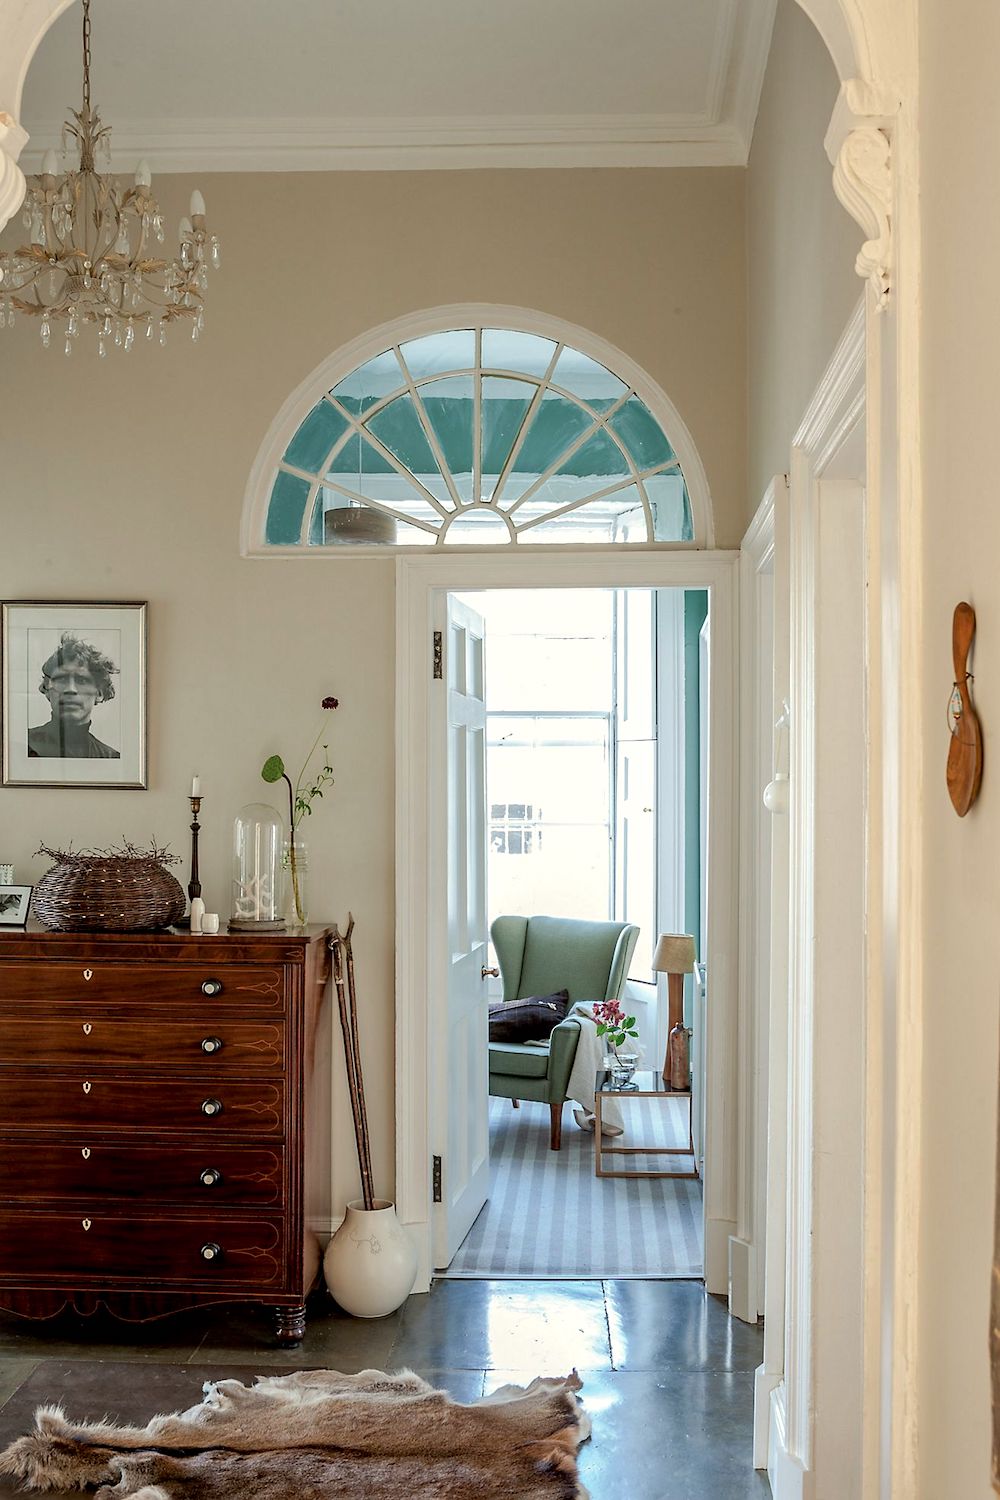 Farrow & Ball Tallow - via Anthropologie - little-known paint colors